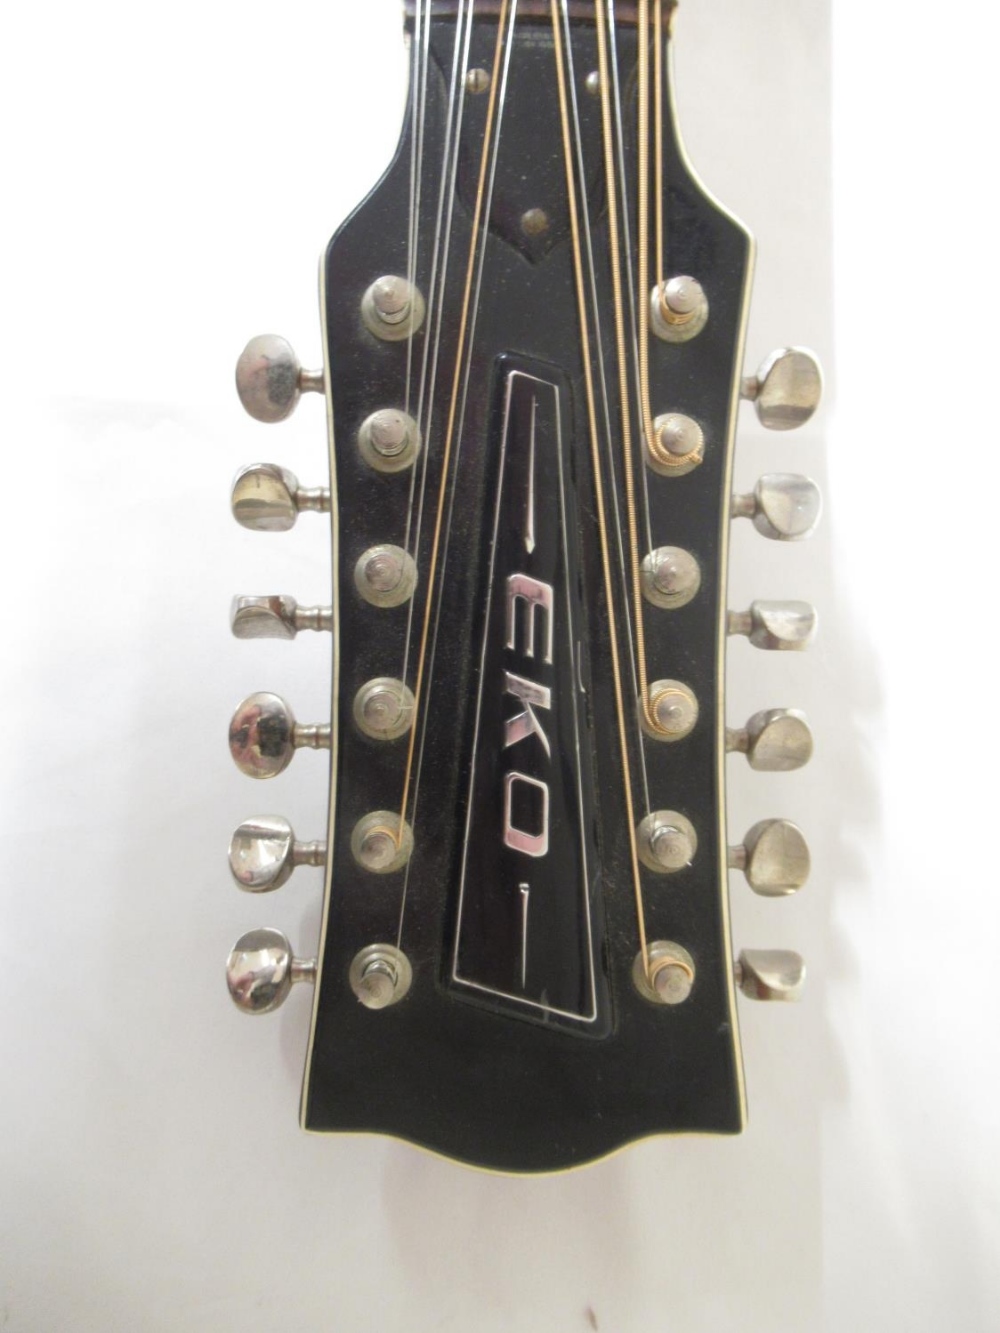 Eko Model no. J. 56/1 12 string acoustic electric guitar, with a Madarozzo carry bag (Victor Brox - Bild 2 aus 10